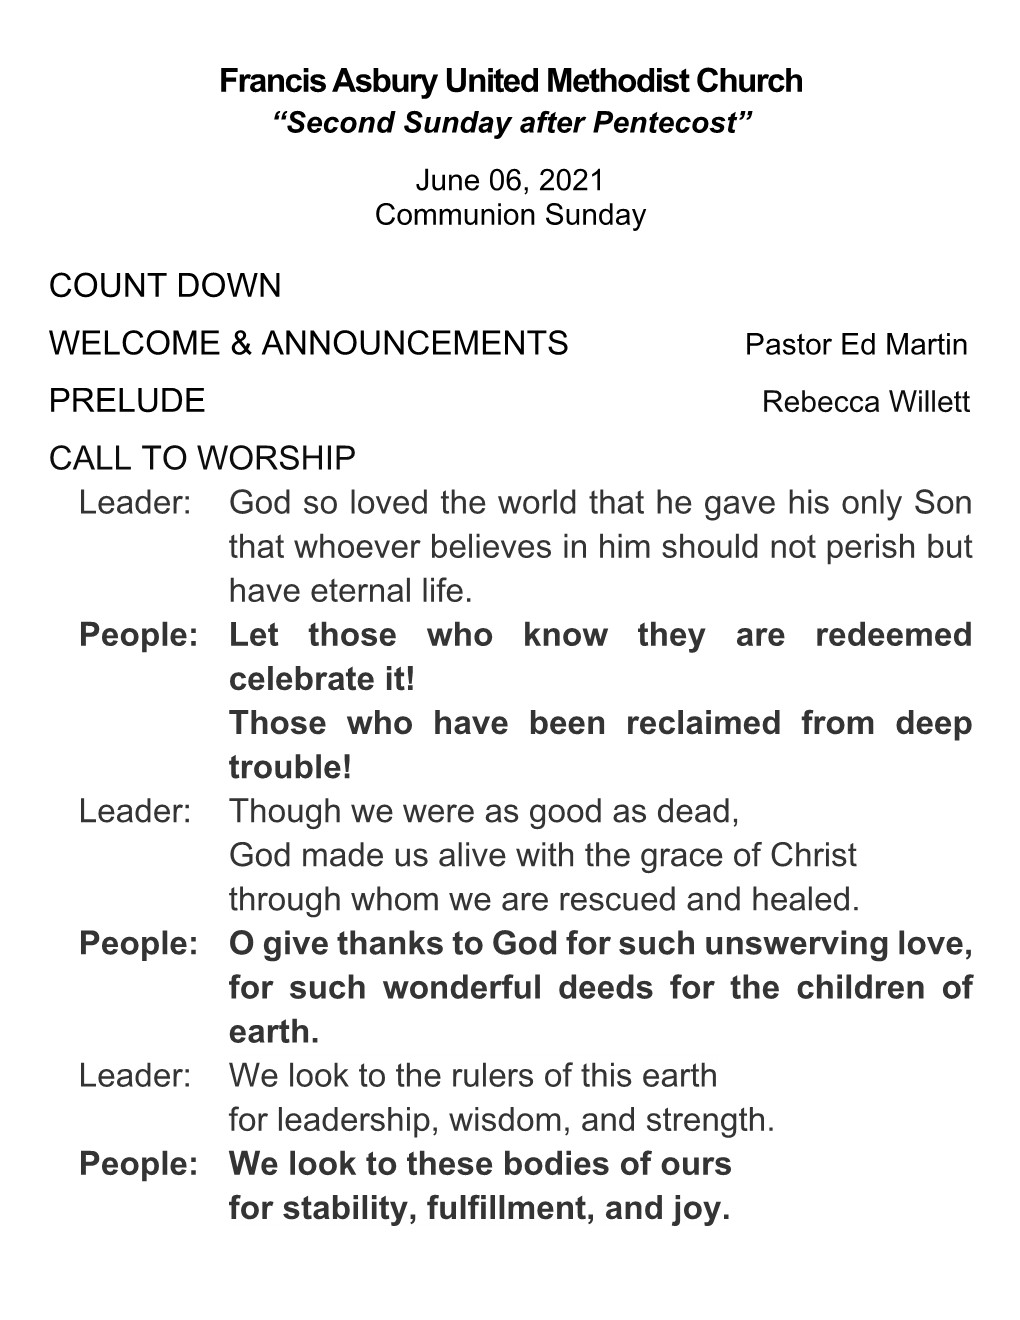 Francis Asbury United Methodist Church COUNT DOWN WELCOME & ANNOUNCEMENTS PRELUDE CALL to WORSHIP Leader: God So